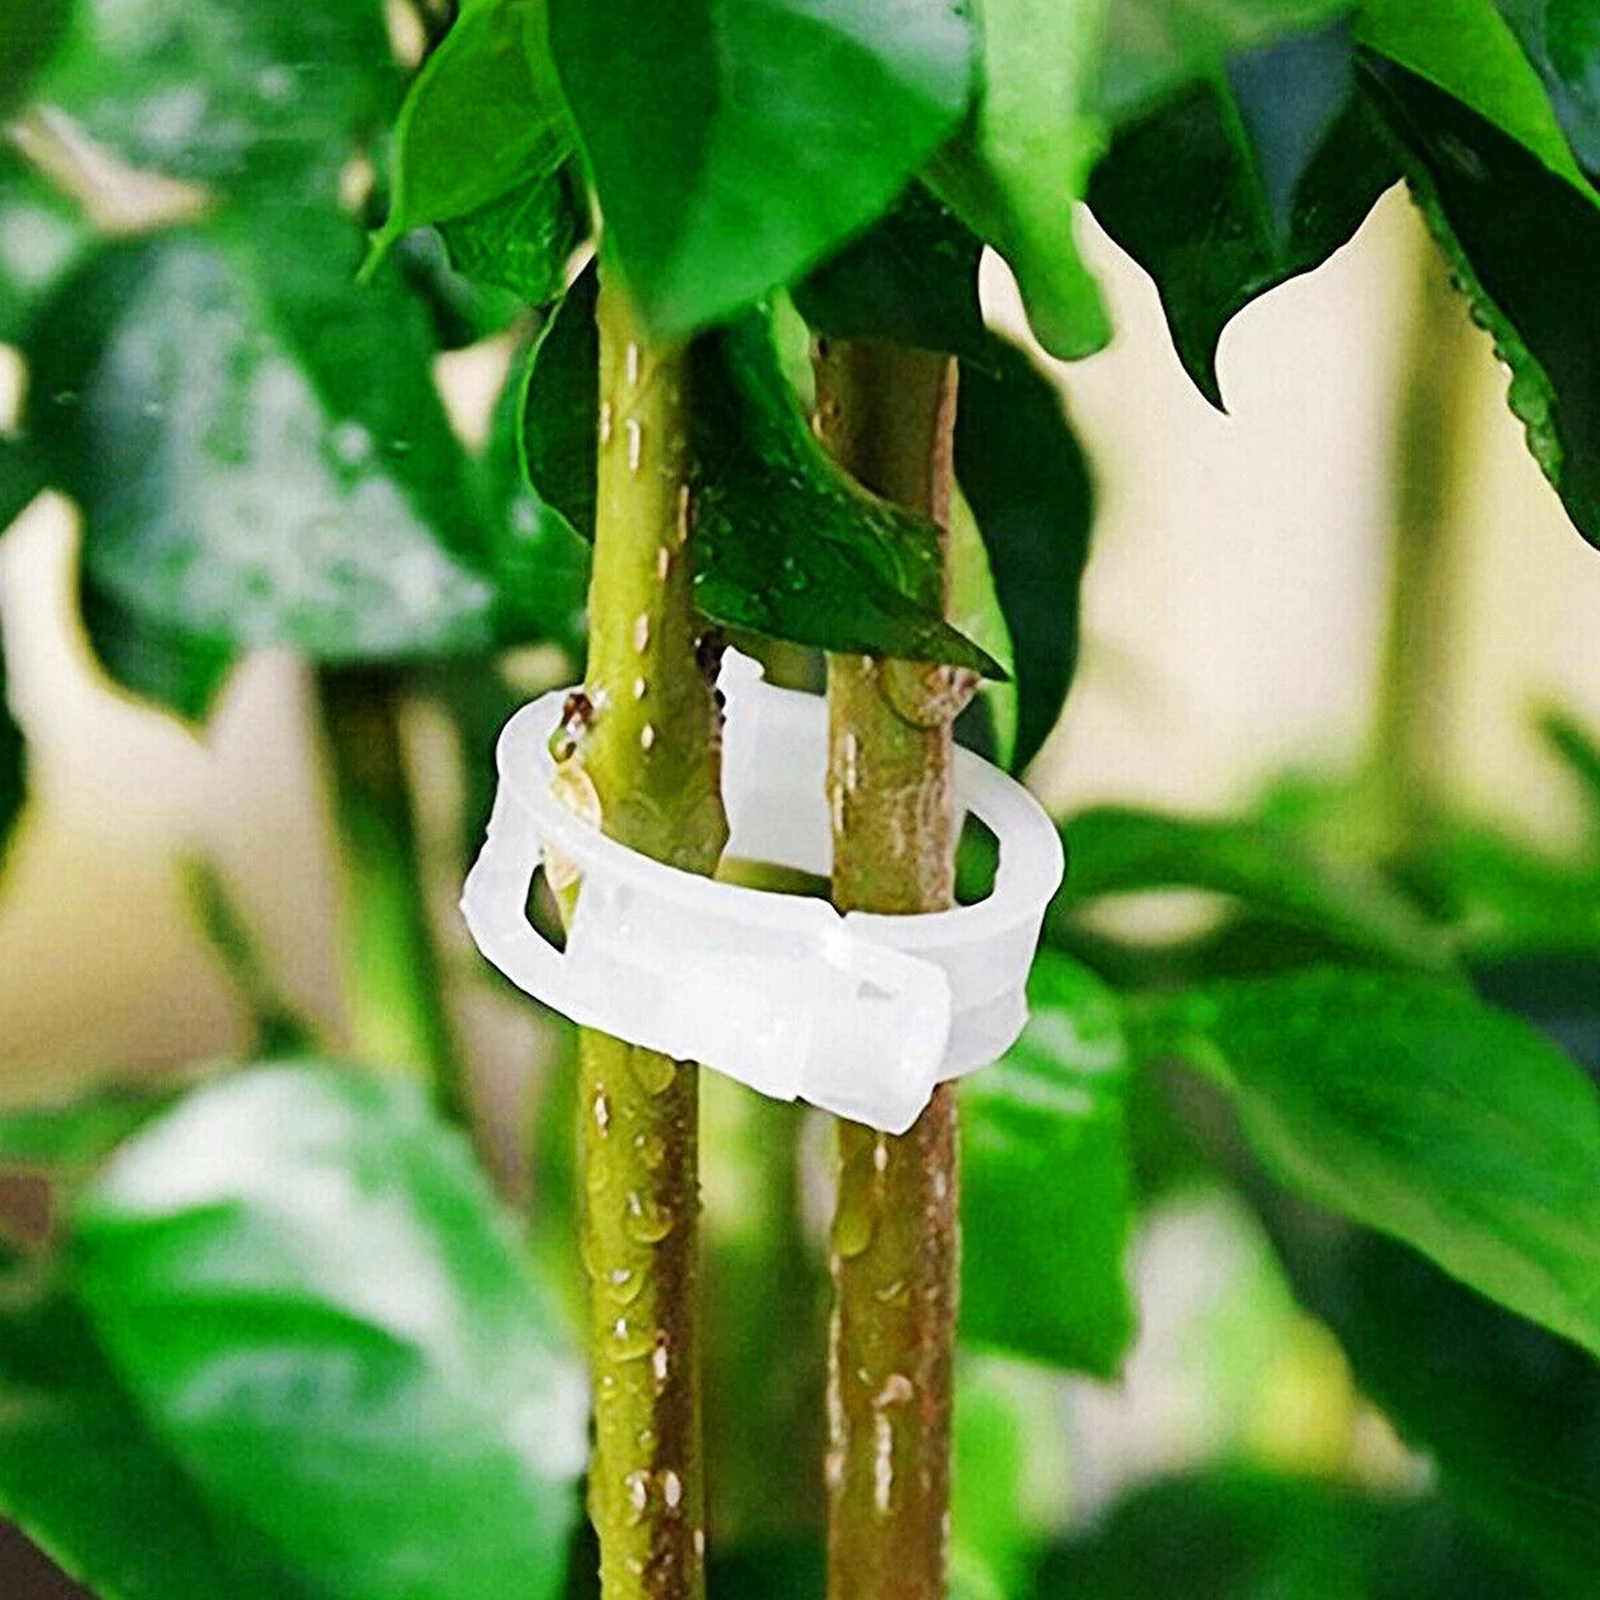 100 Tomato Grafting Clips Supports Plants/Vines Easily Connects to Trellis/Twine 